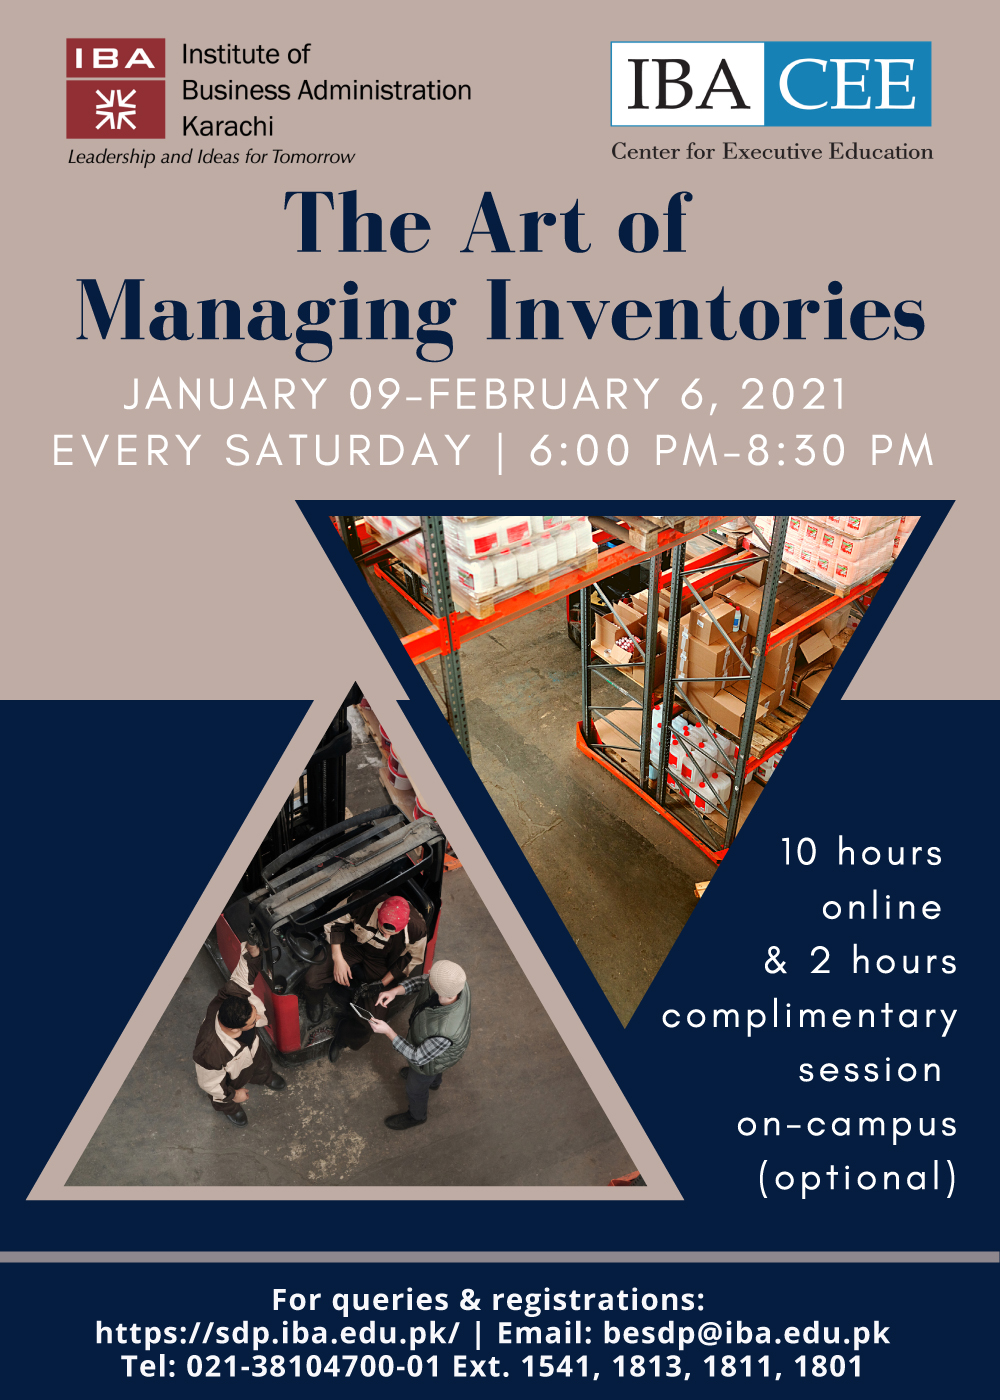 The Art of Managing Inventories